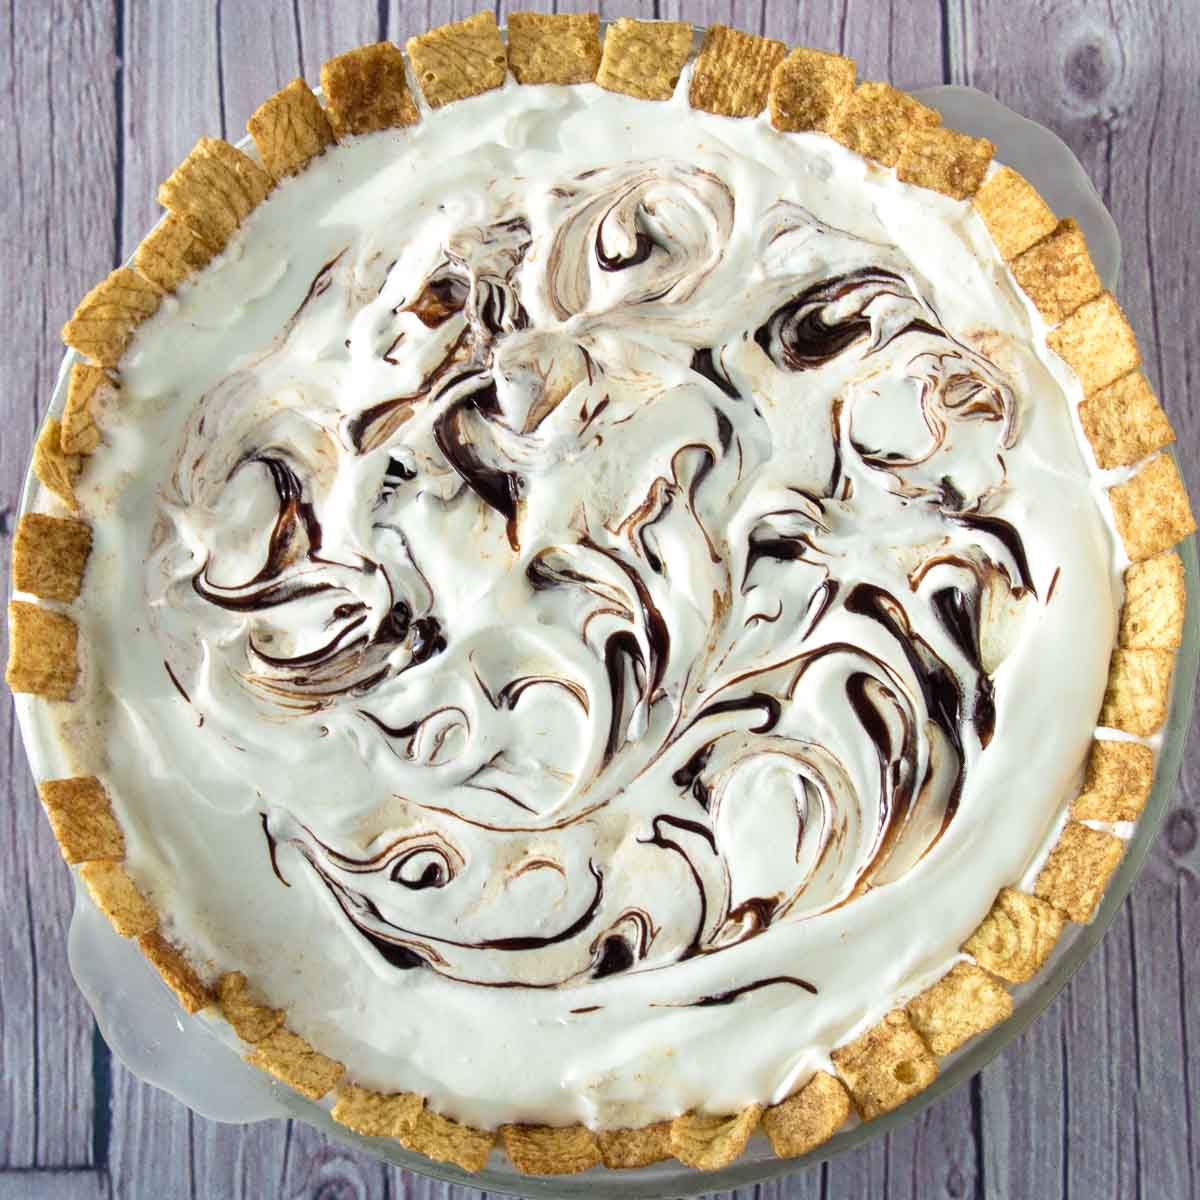 Ice cream pie with swirls of hot fudge on top and cinnamon cereal around the edges.